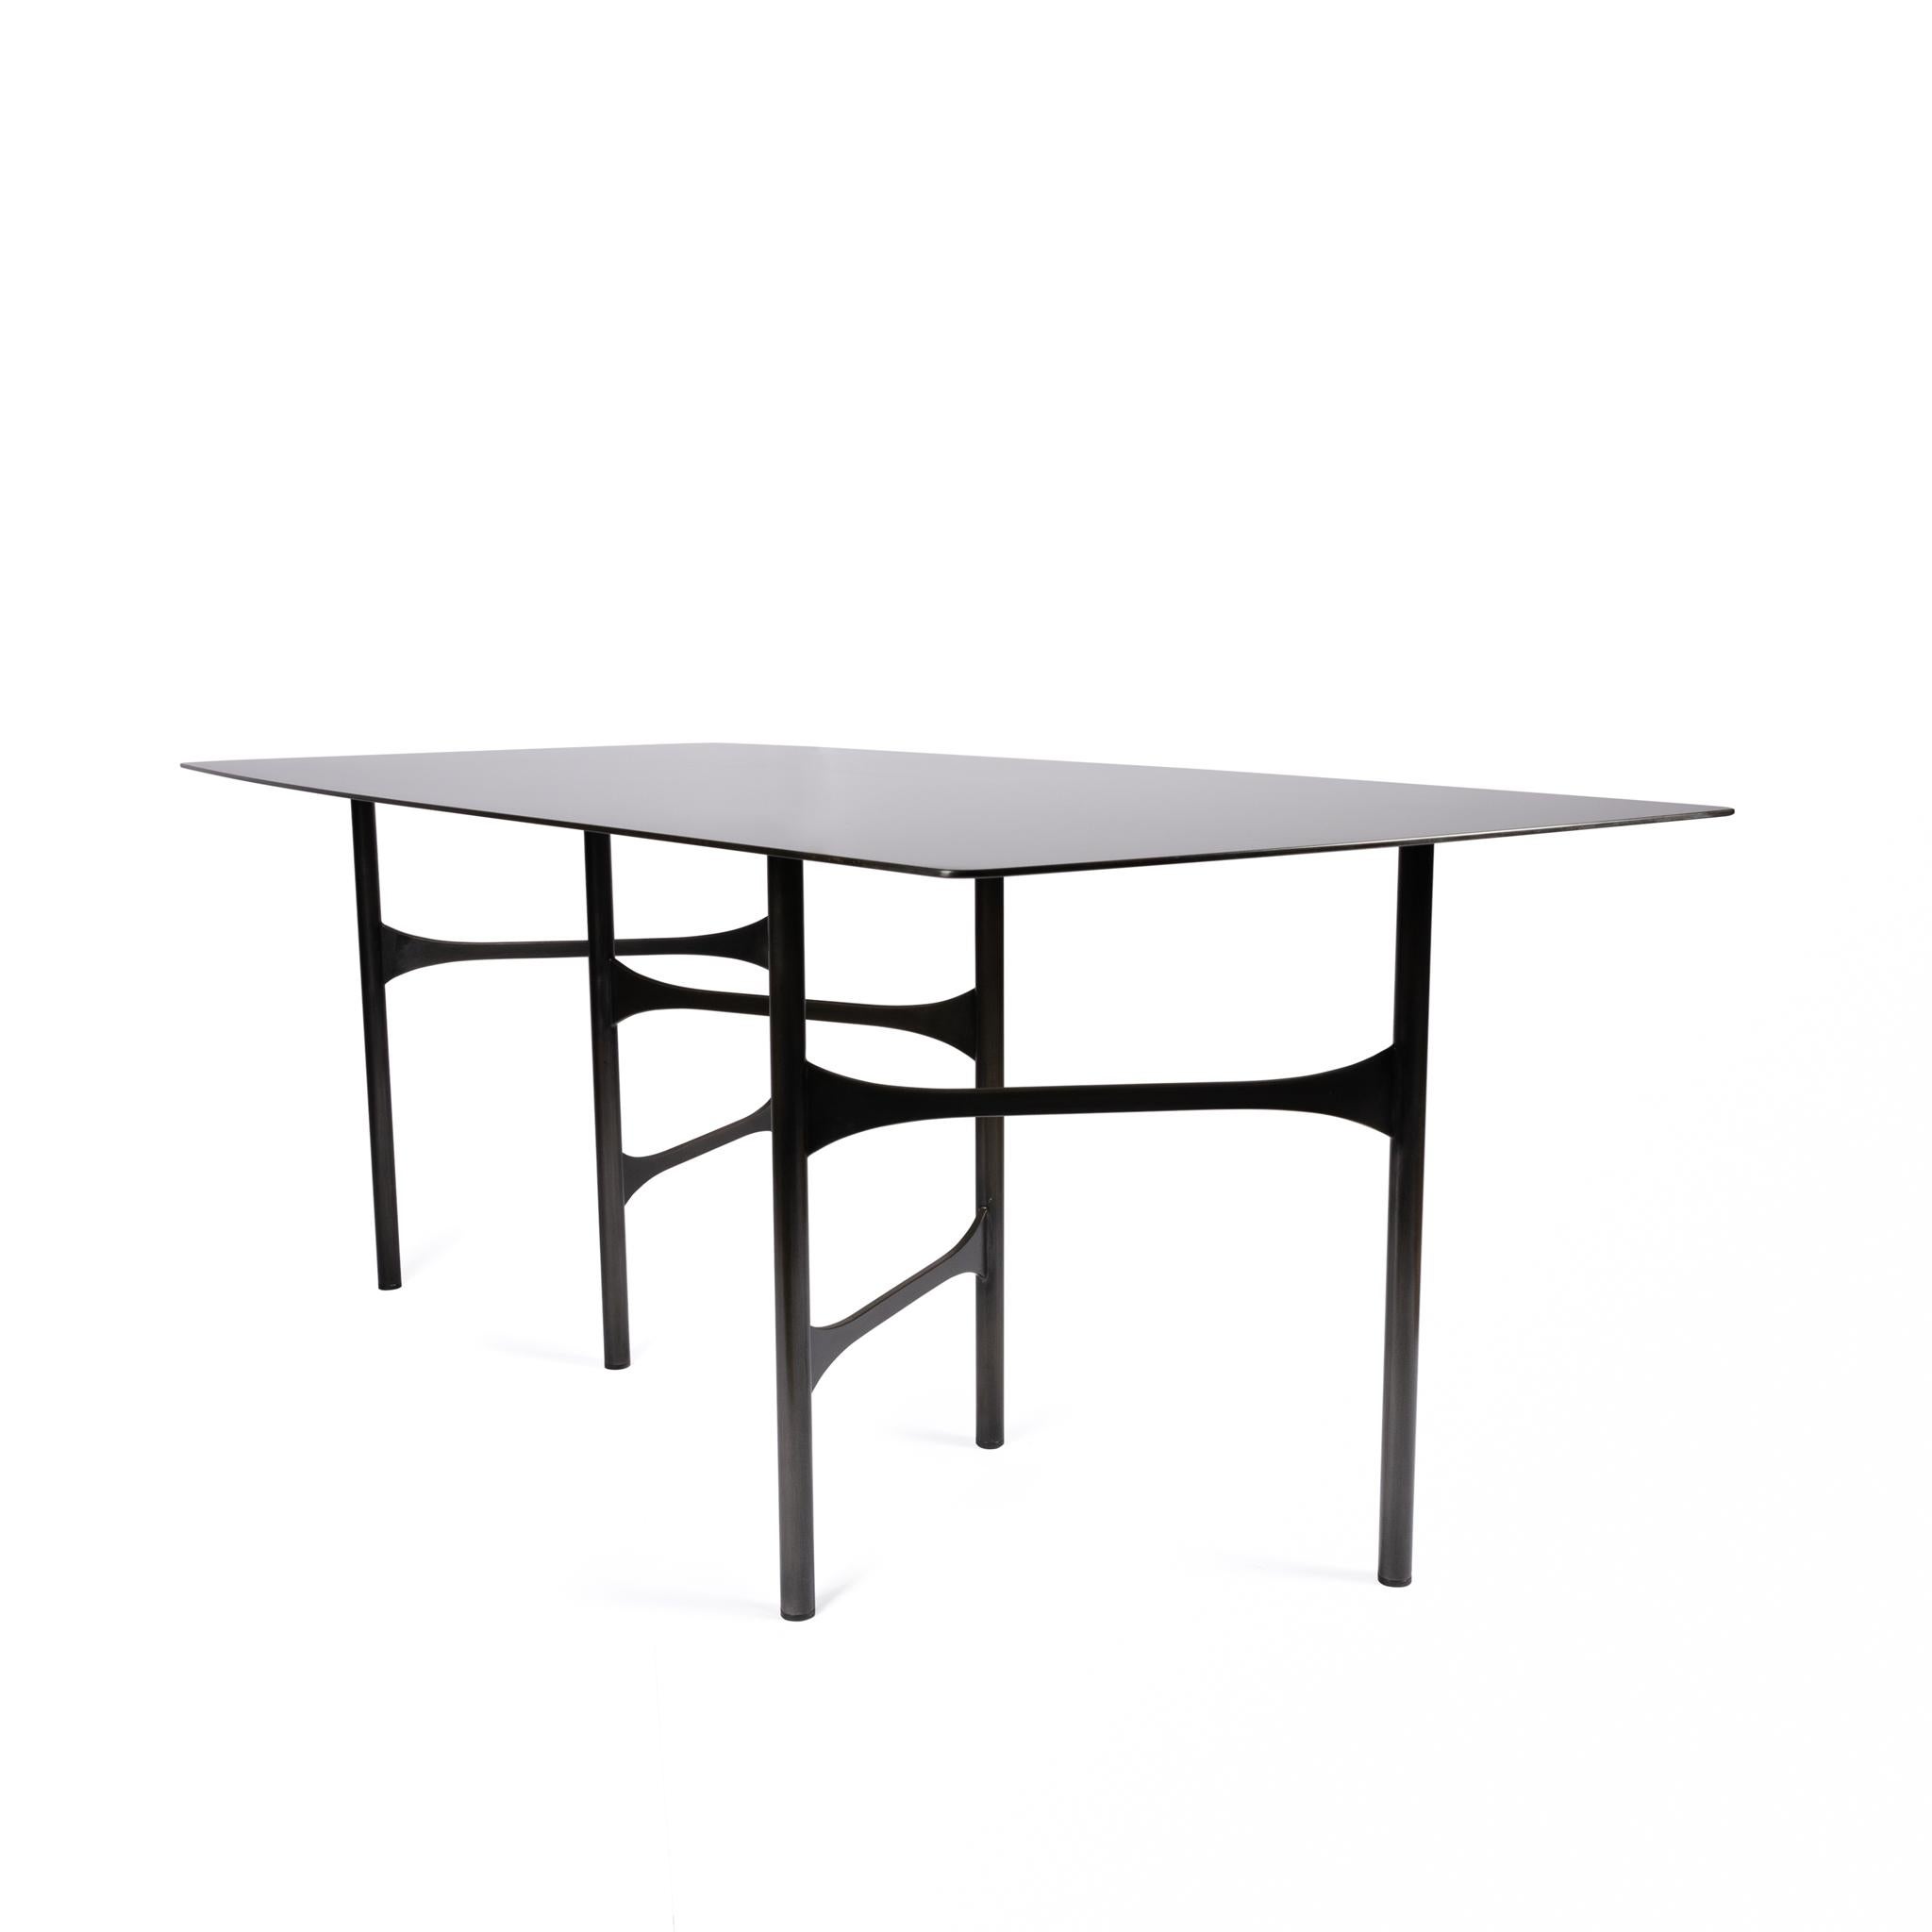 Blending contemporary and organic influences, the Strut Table was designed as an eye-catching table. Its subtle details and a hand applied finish makes the Strut Table a striking piece for any environments. It's metal table top hand finish,